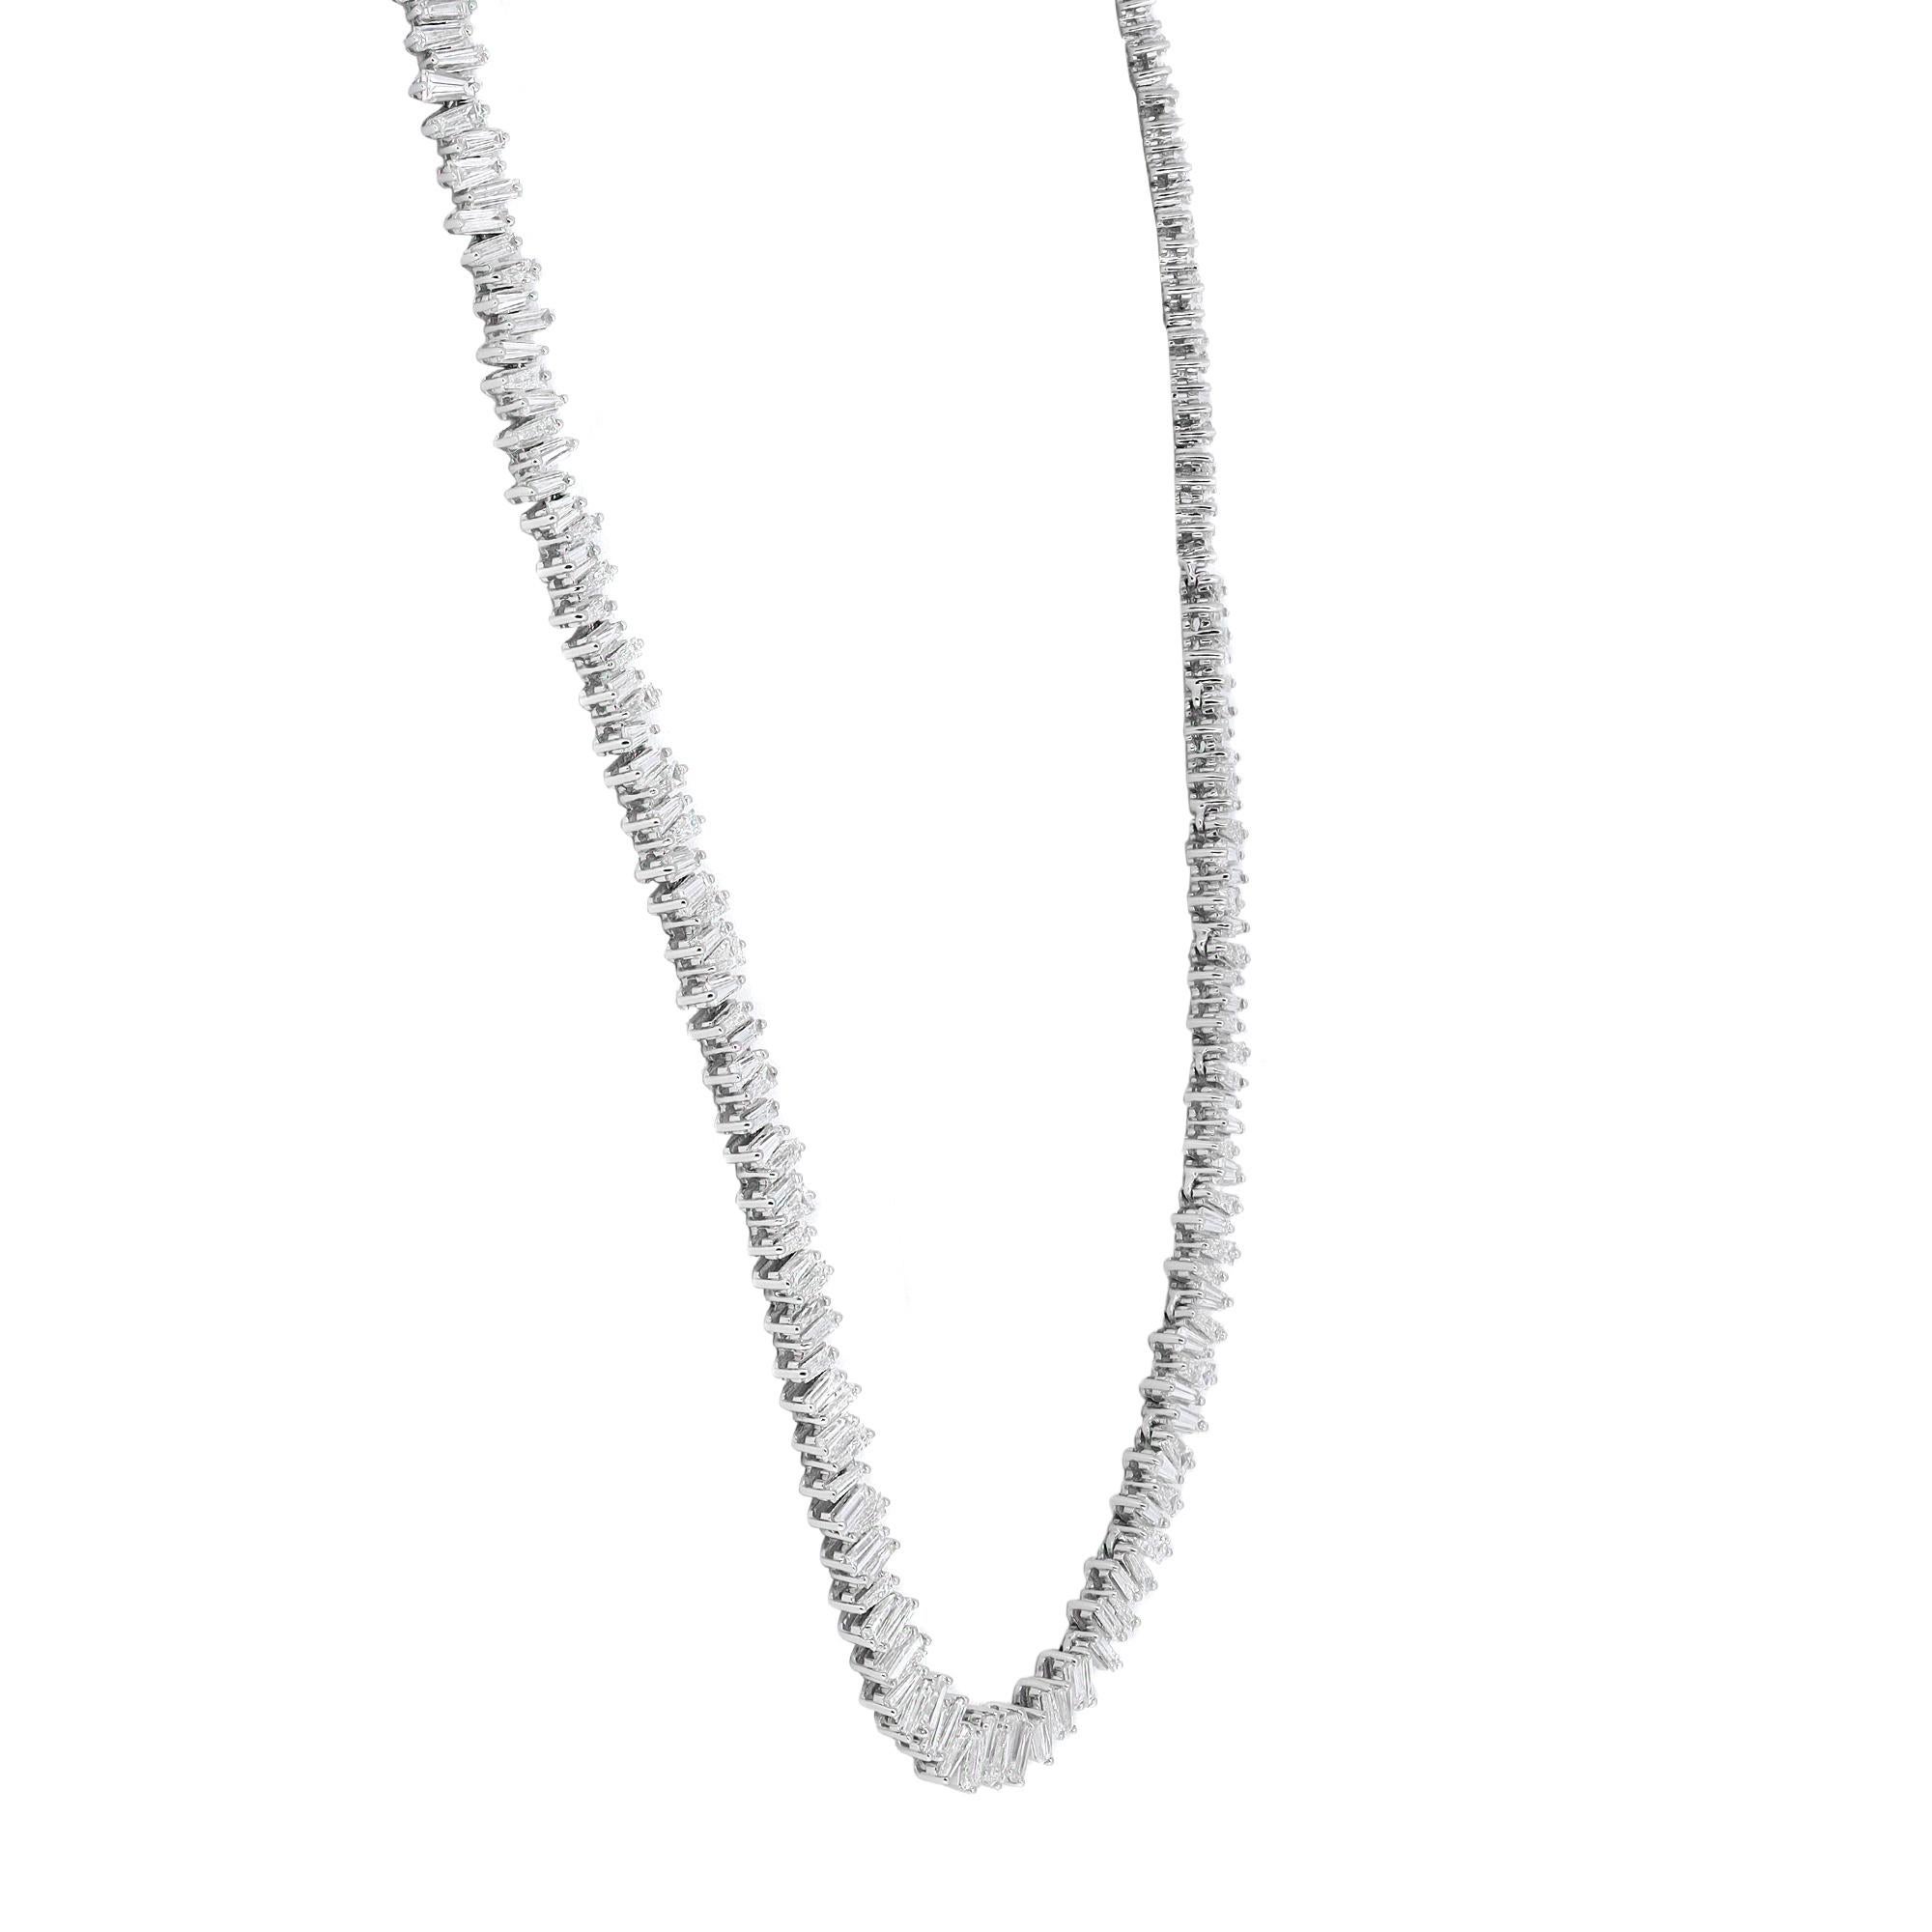 Elegant and alluring, this diamond tennis statement necklace features prong set Baguette Cut shimmering white diamonds weighing 13.02 carats in total. Crafted in fine 18k white gold. The necklace is secured by a hinged locking clasp. Length: 16